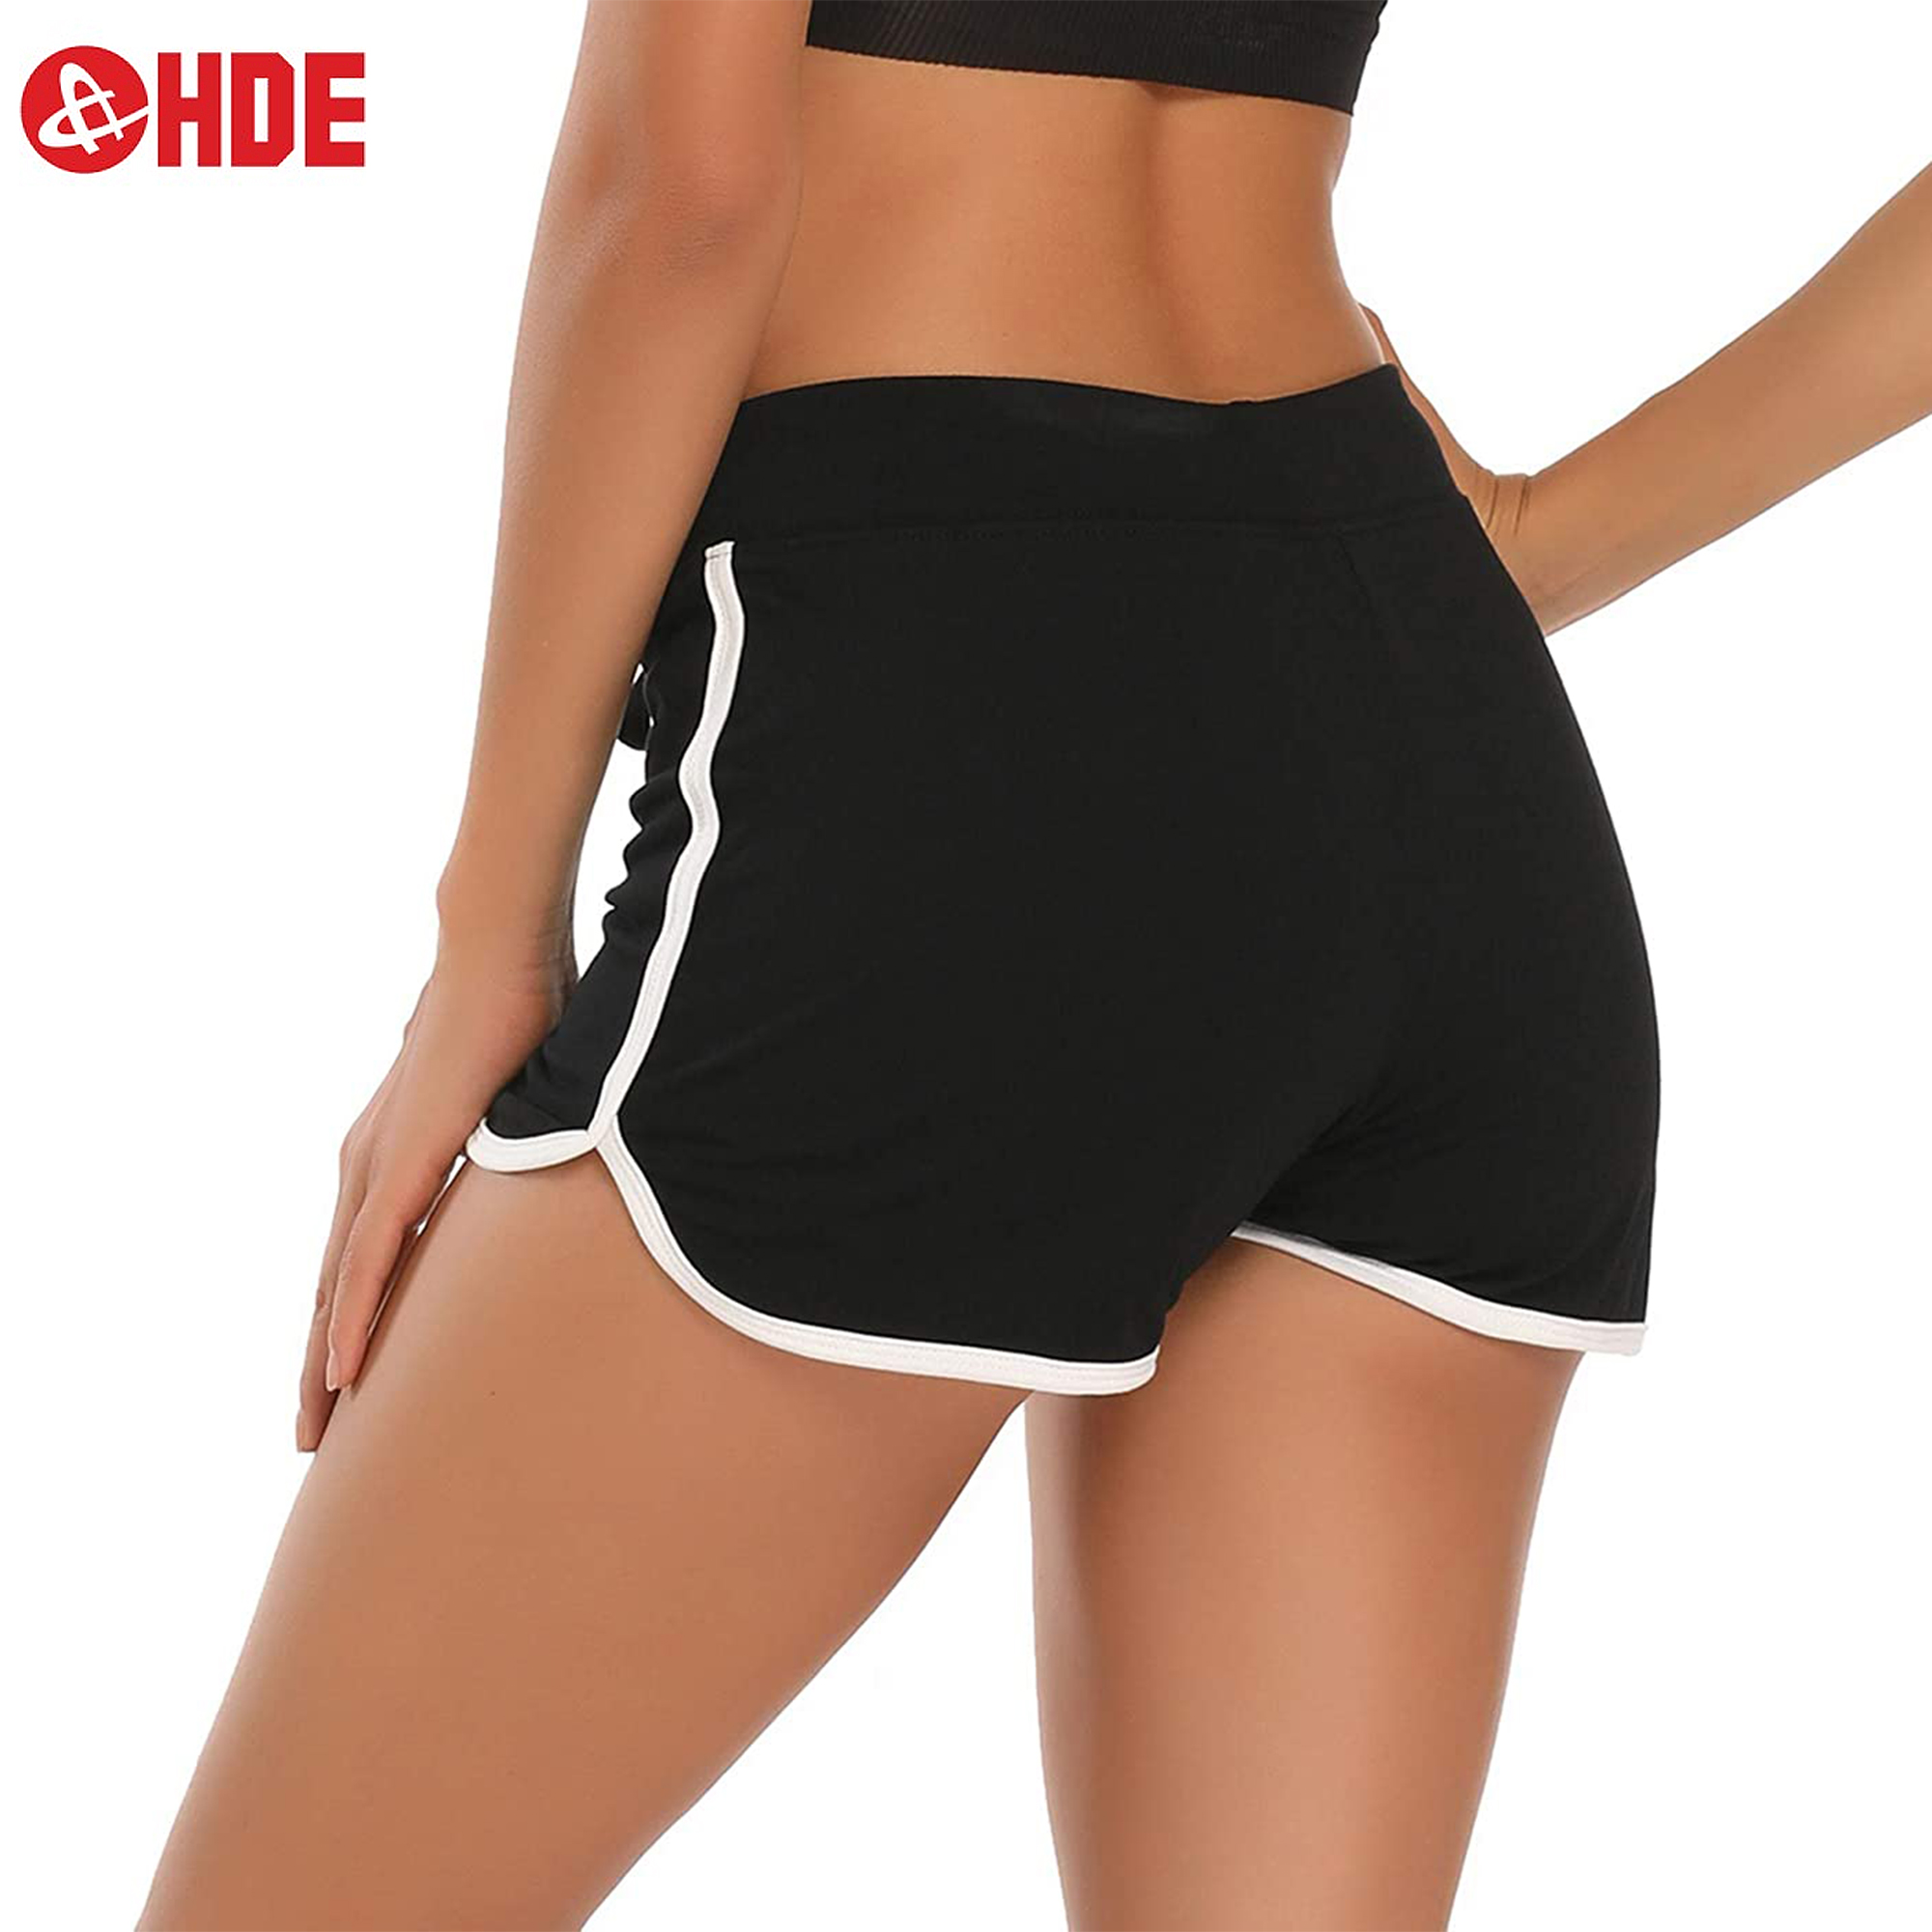 HDE Women Dolphin Shorts Running Workout Clothes Black Small - image 4 of 9